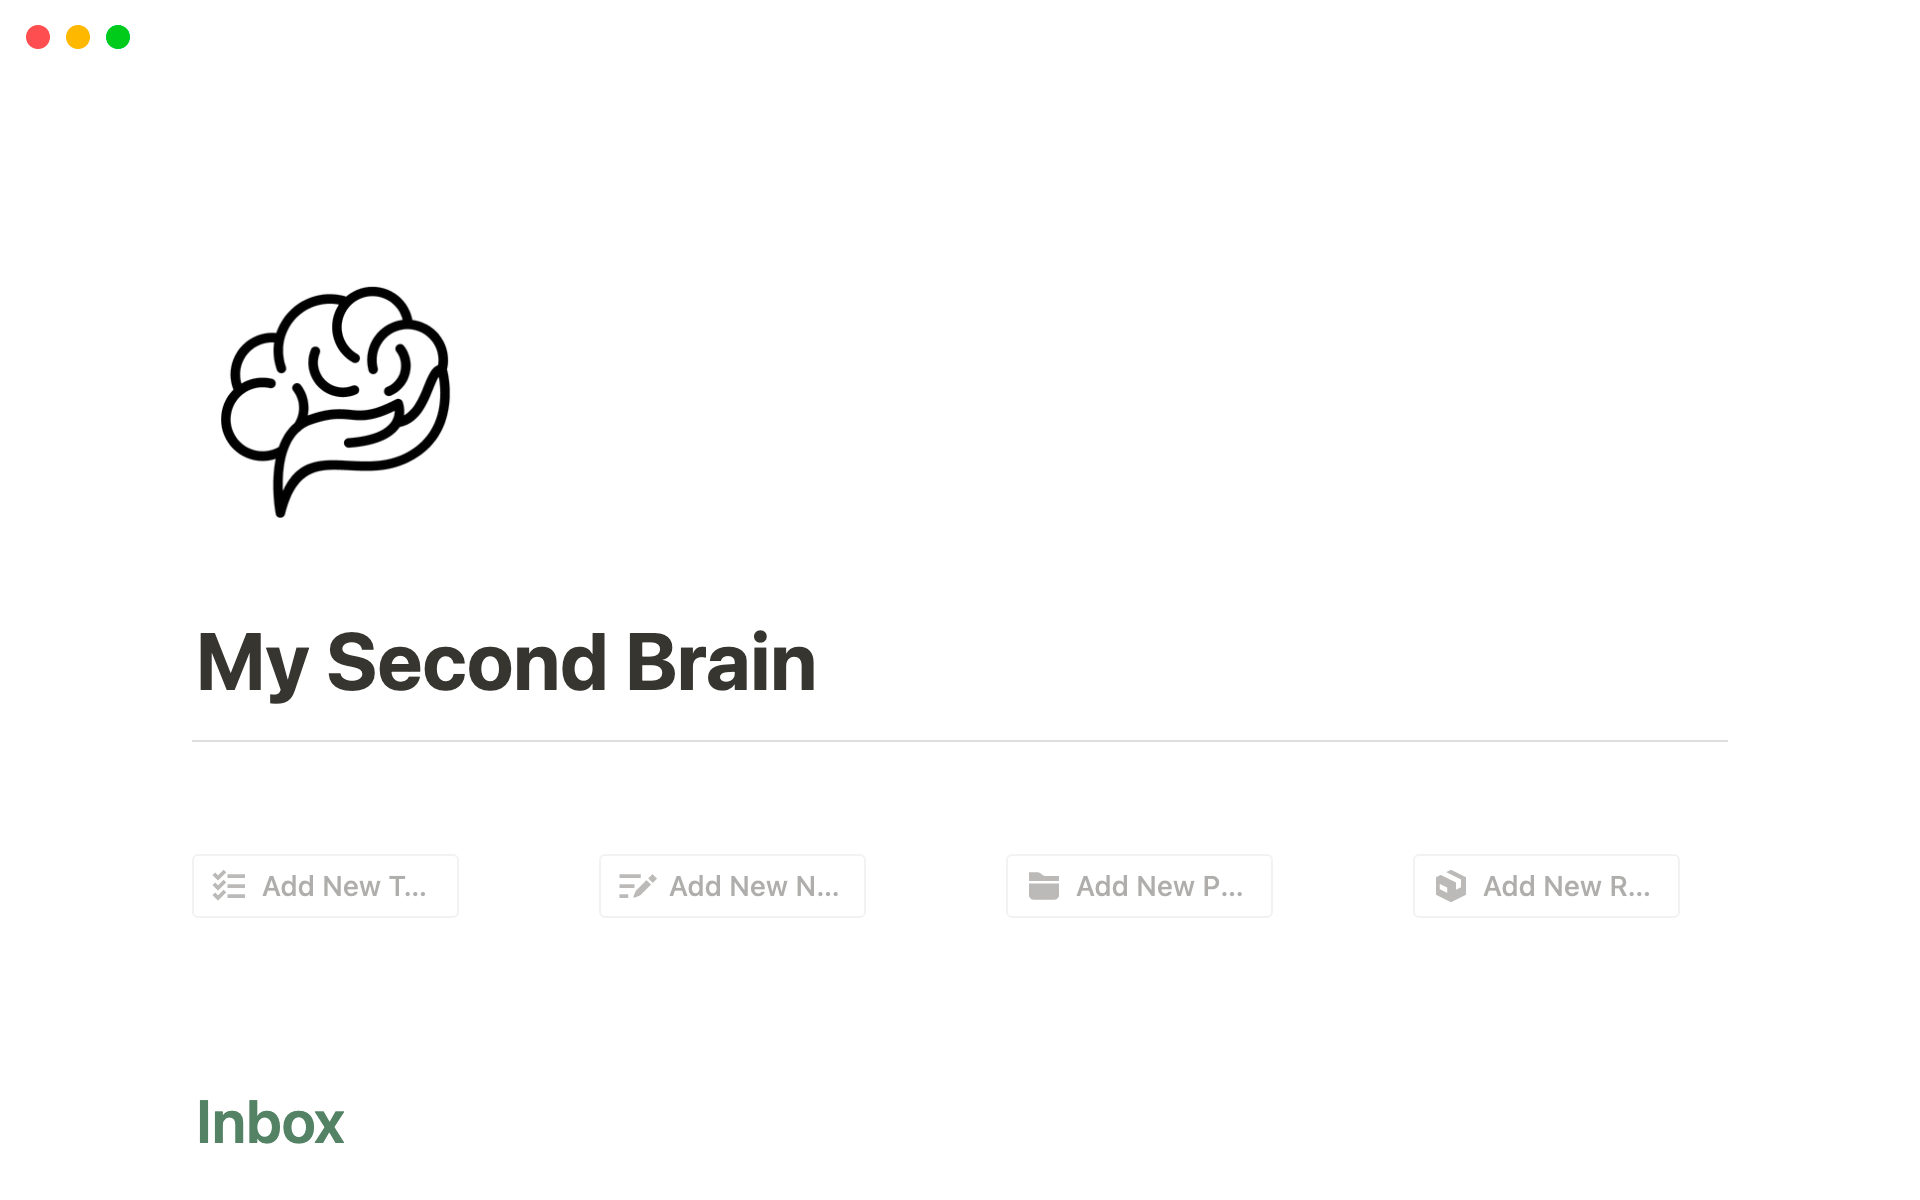 My Second Brain," the all-in-one solution designed to help you capture, organize, and streamline your life.